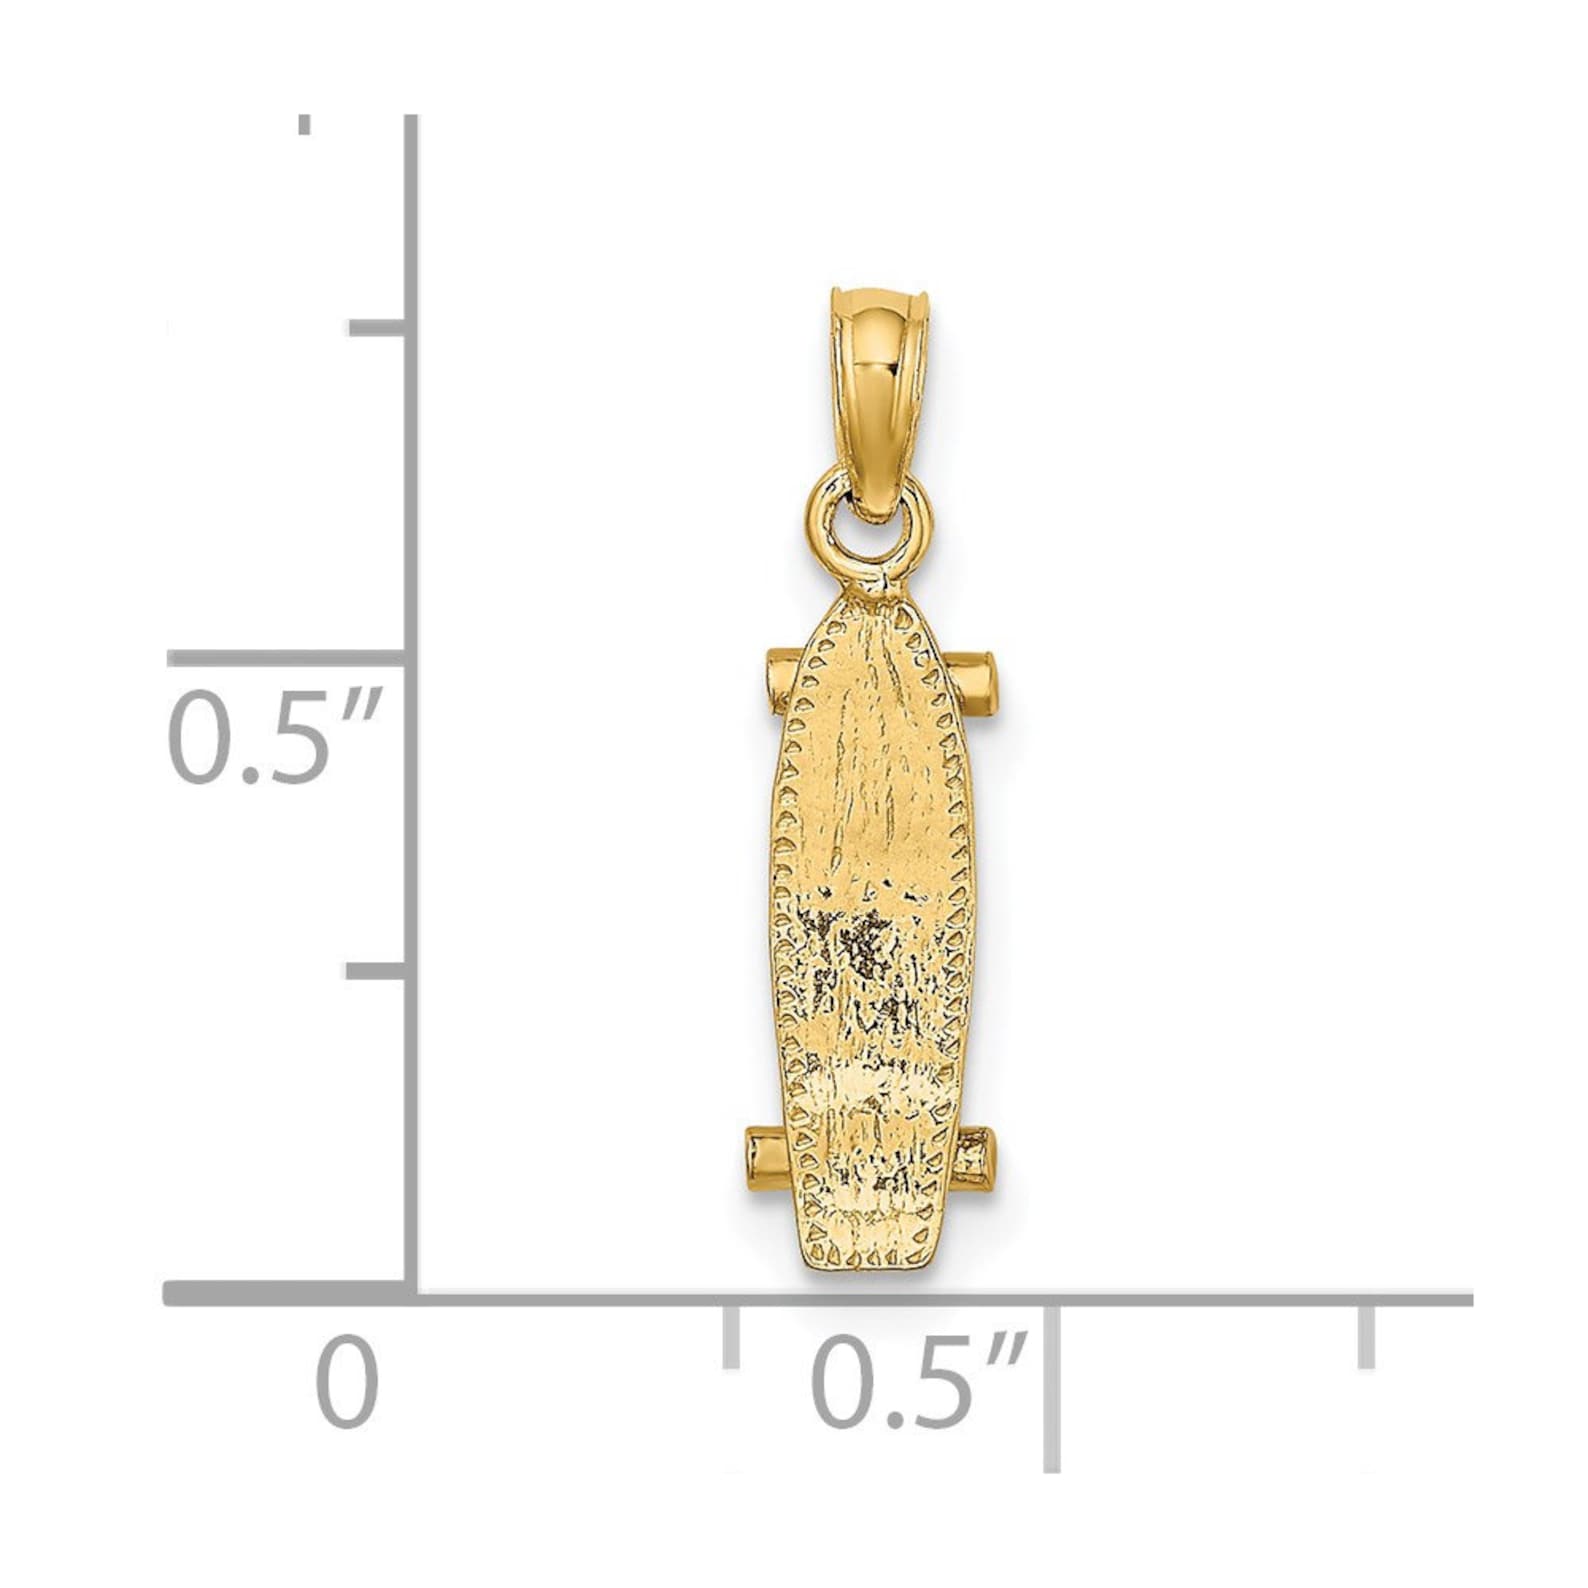 Gold 3D Skateboard Pendant - Charlie & Co. Jewelry